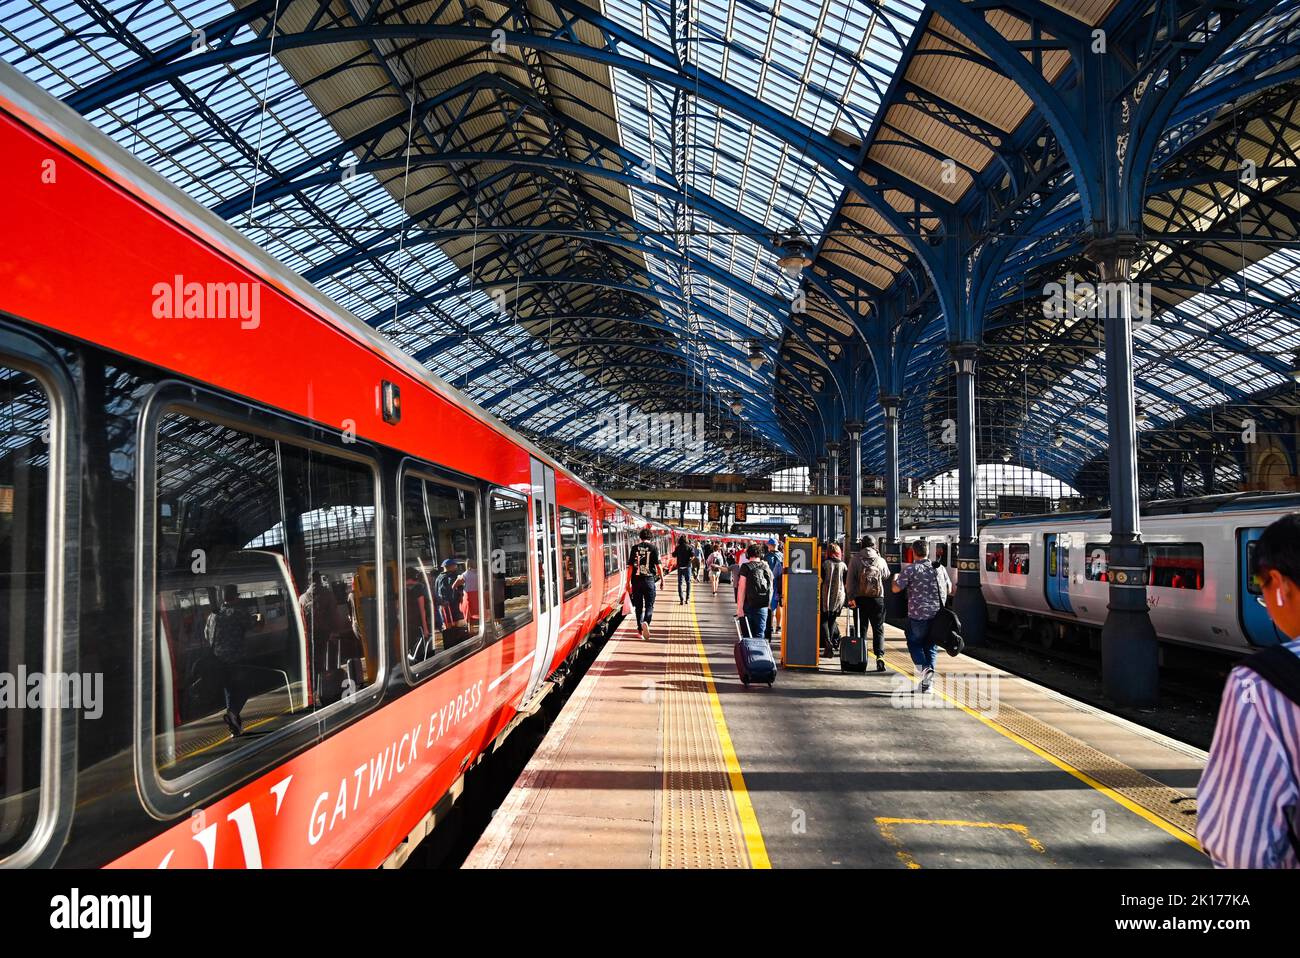 Gatwick Express train on the platform at Brighton Railway Station in Sussex UK  Photograph taken by Simon Dack Stock Photo